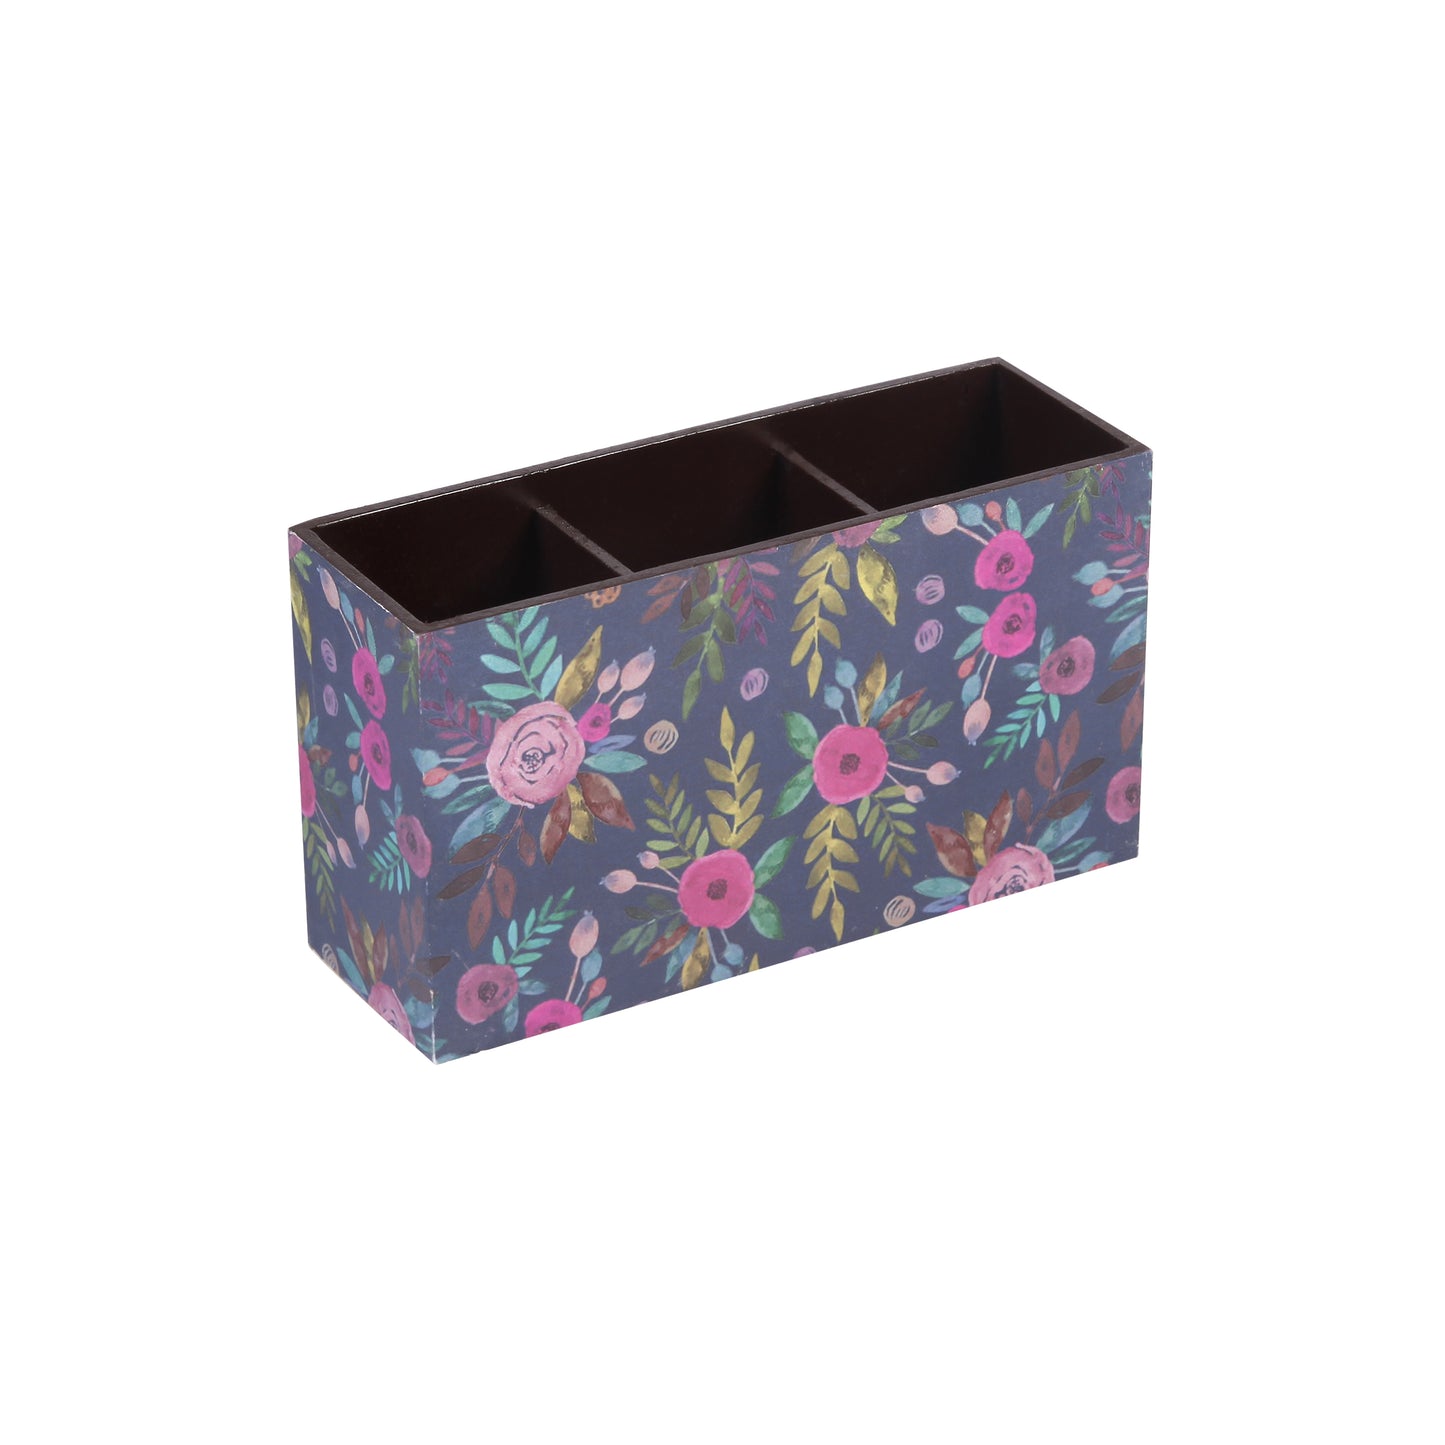 A Tiny Mistake Blue Floral Pattern Wooden Cutlery Holder, 18 x 10 x 6.5 cm